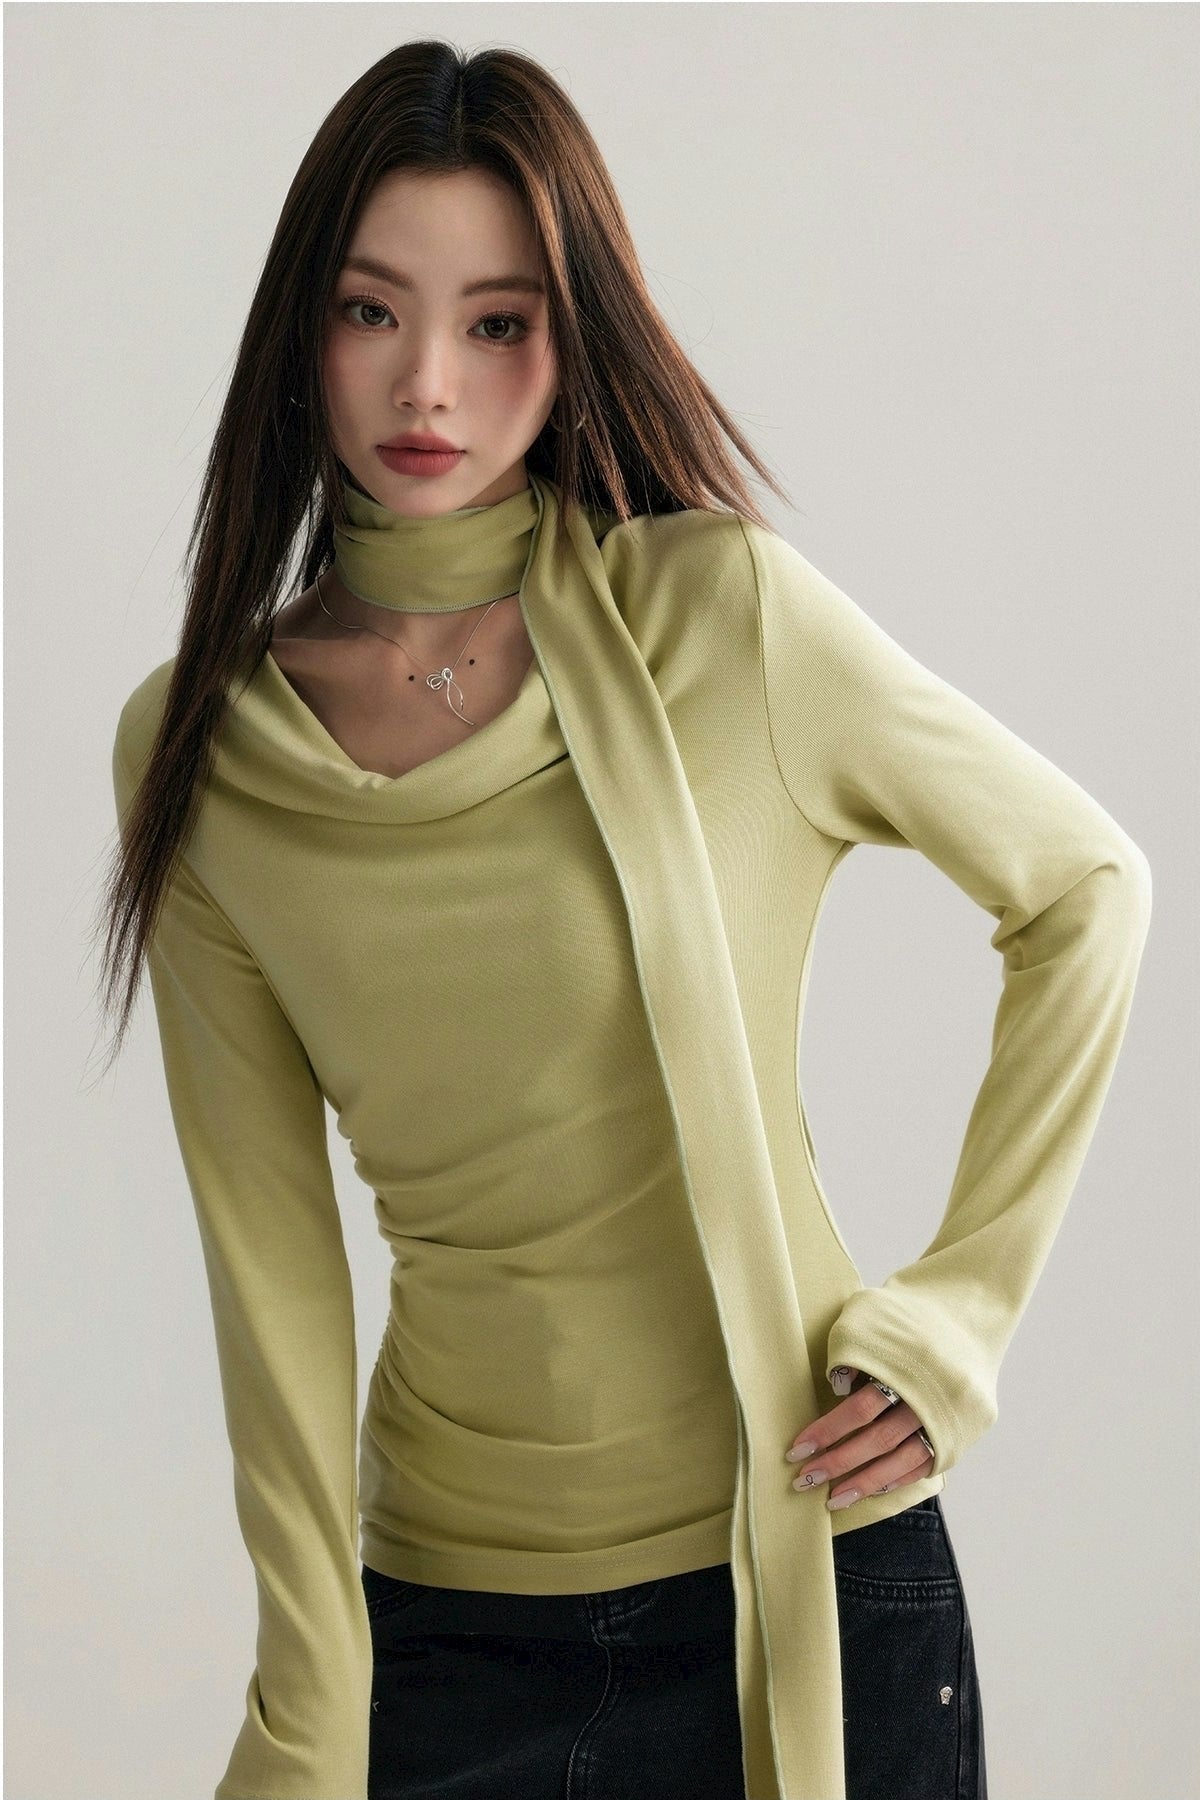 Asymmetrical Draped Neckline Long Sleeve Top with Scarf